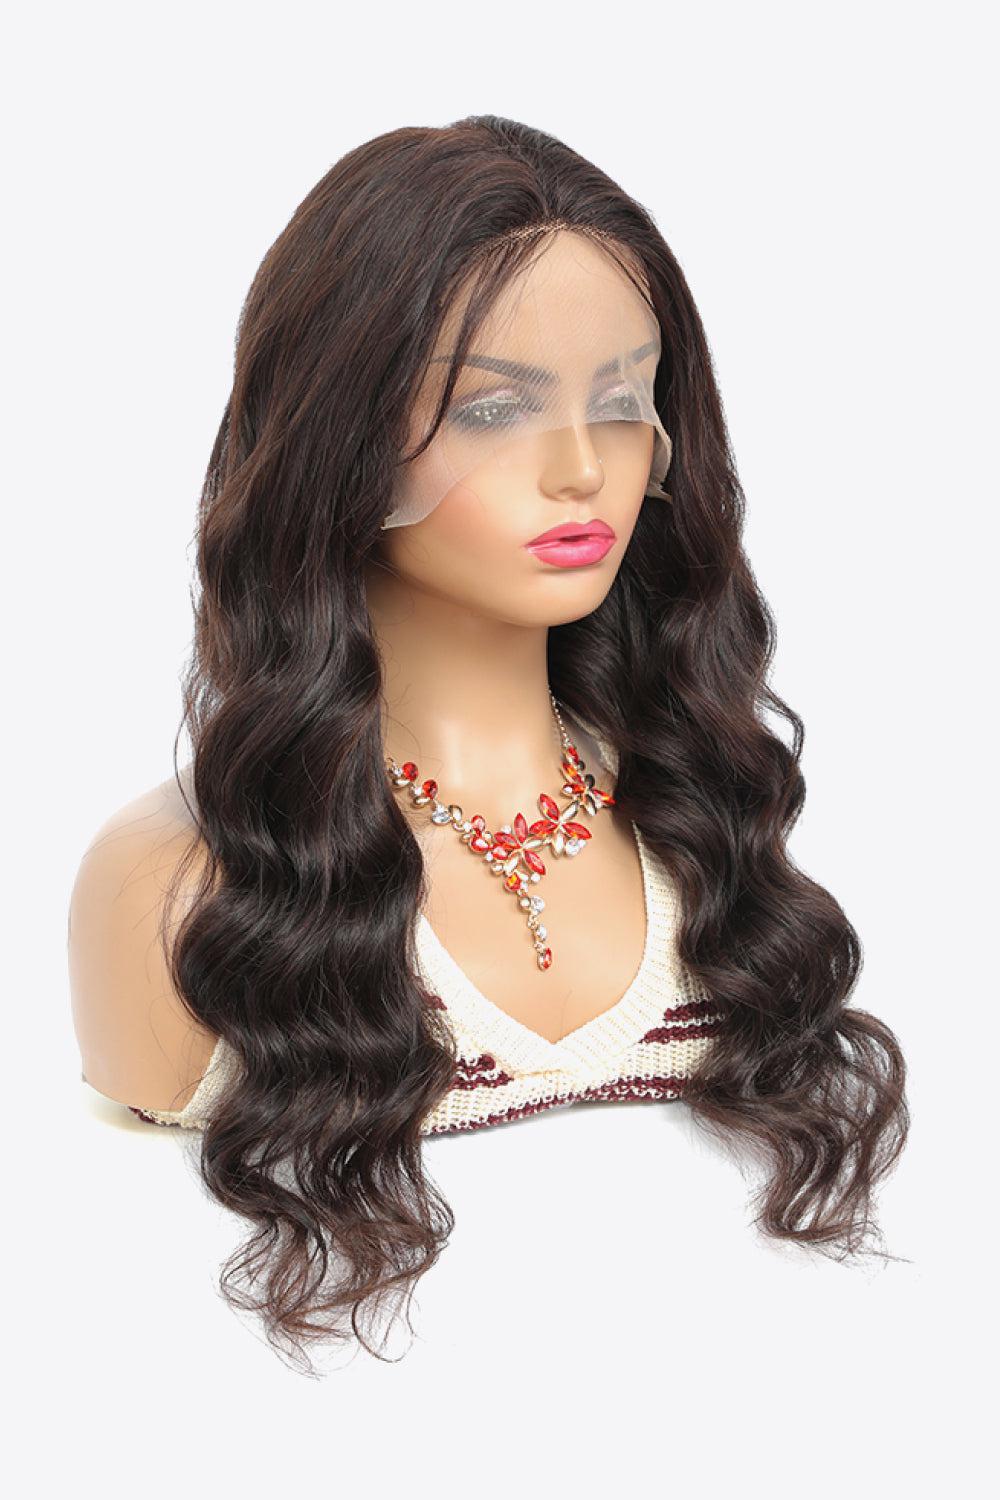 20" 13*4" Lace Front Wave Human Wigs in Natural color 150% Density BLUE ZONE PLANET